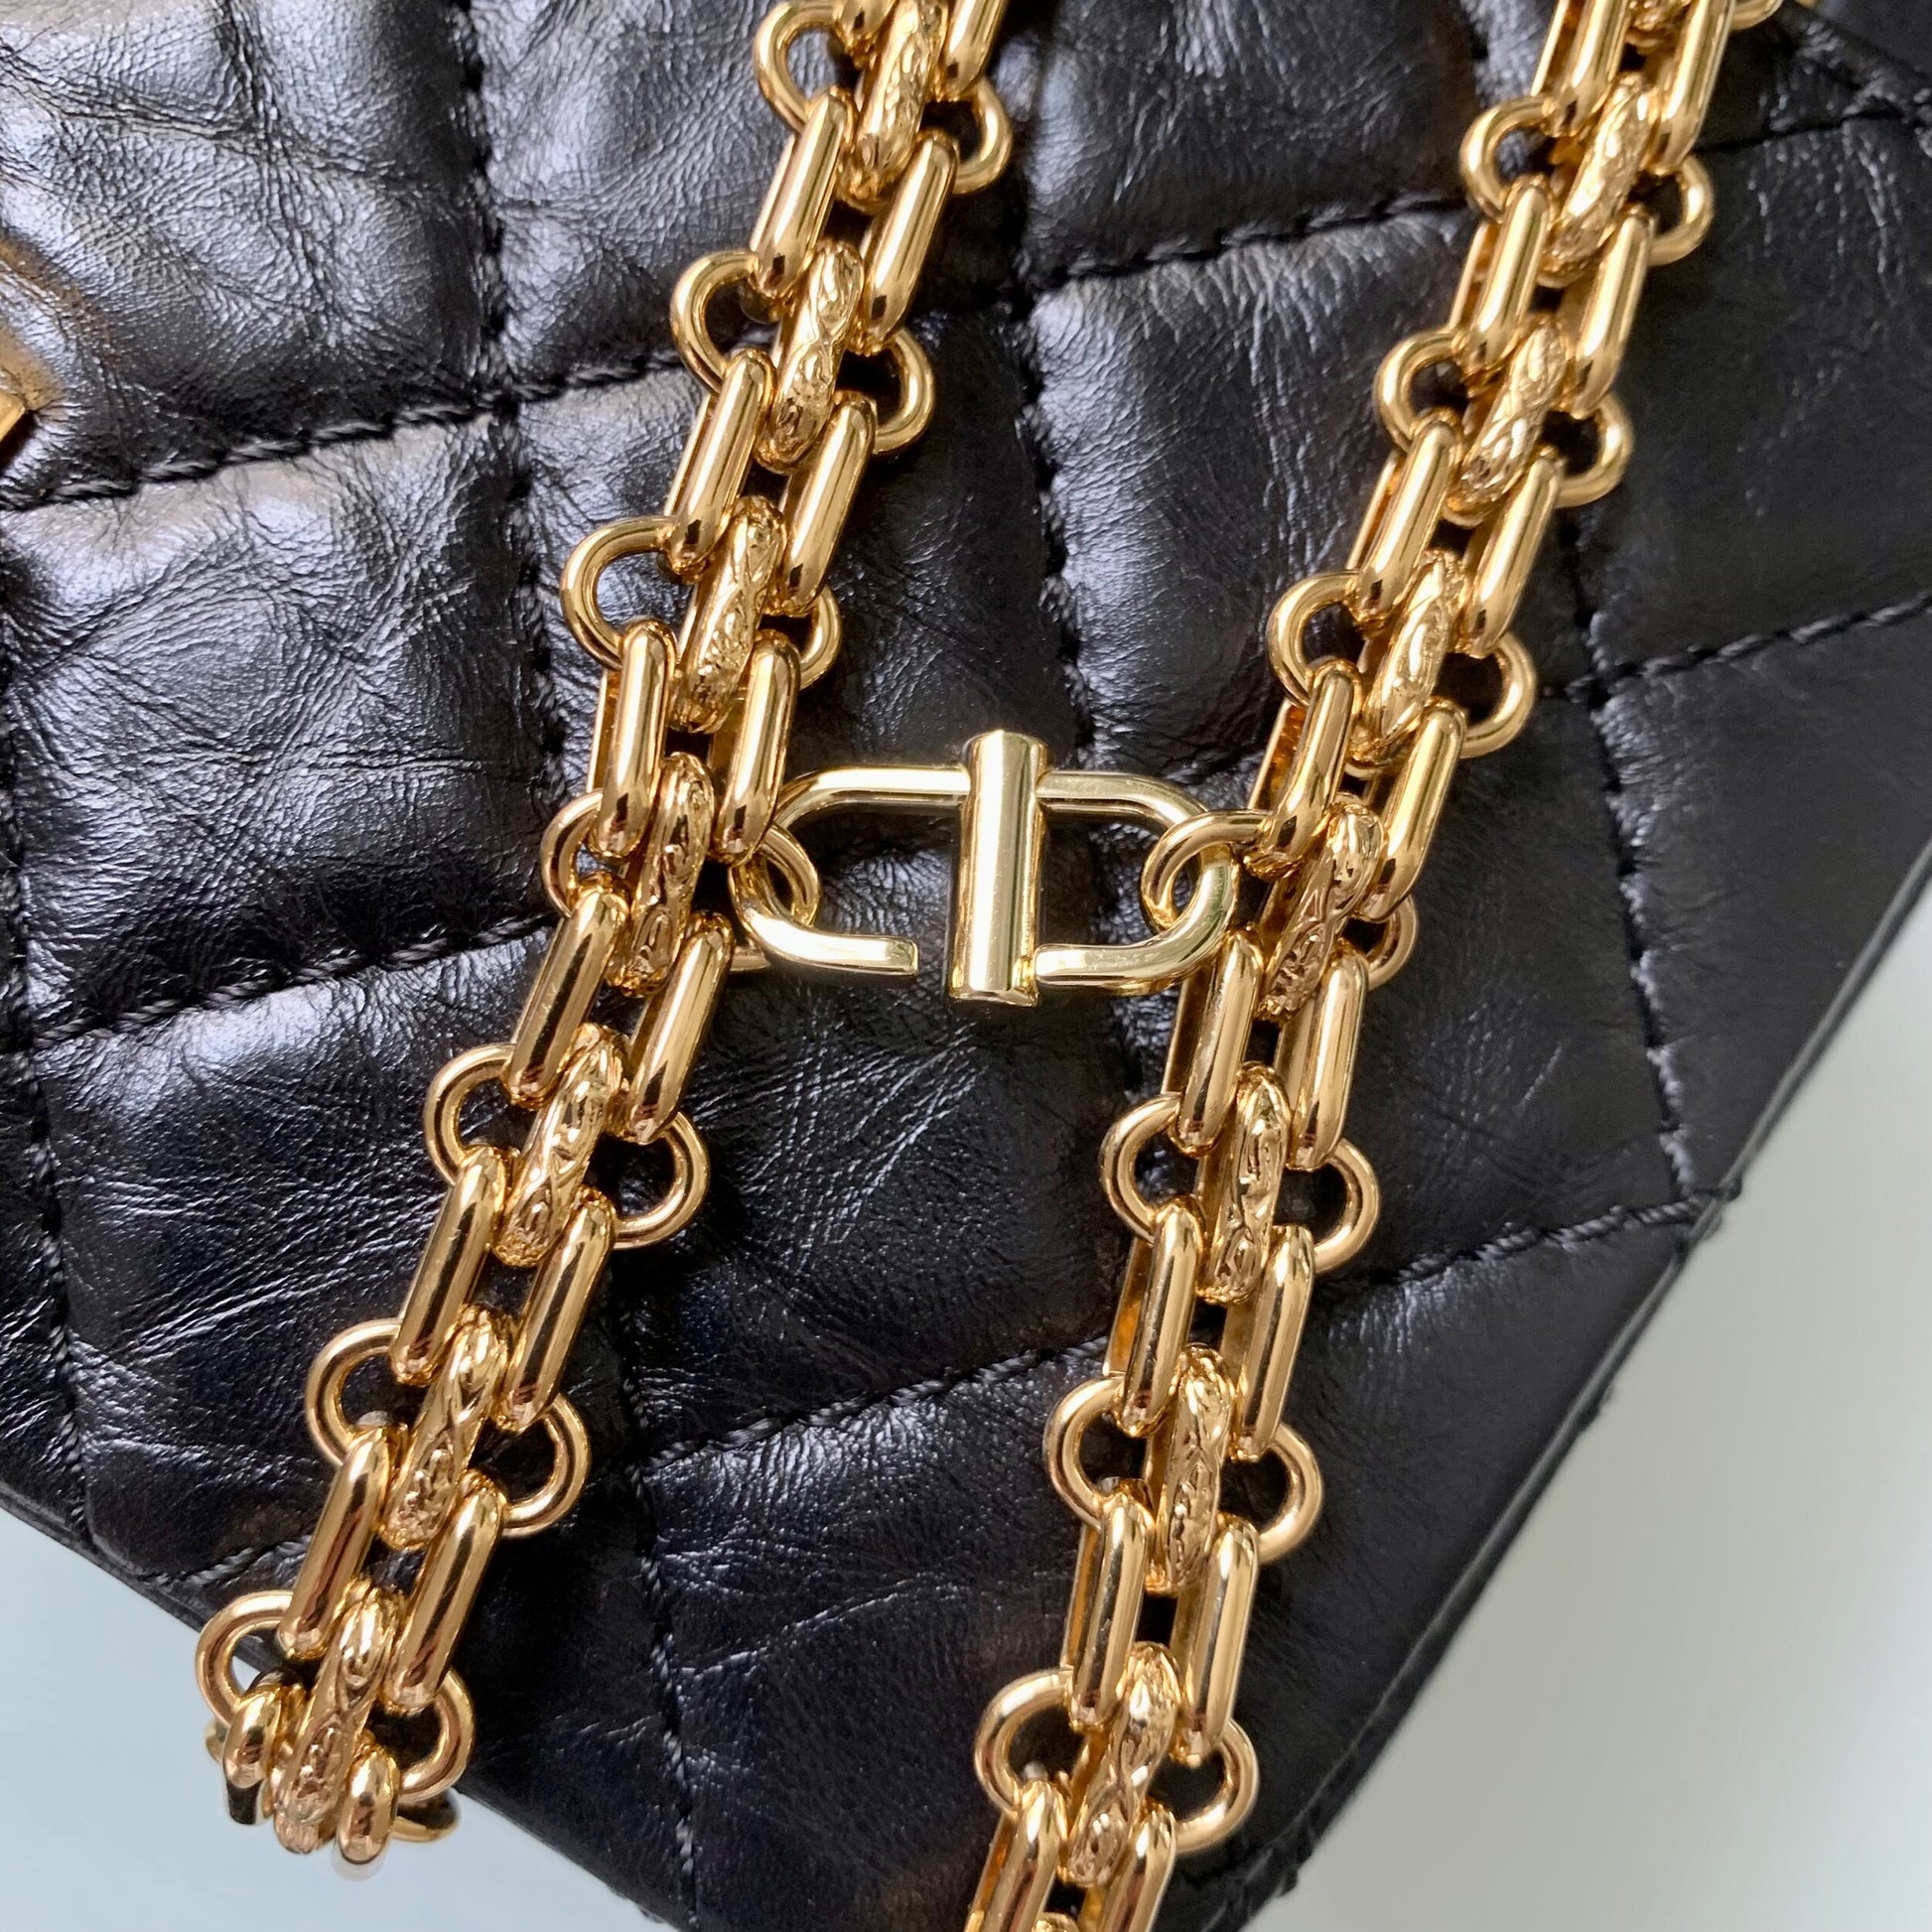 HOW TO SHORTEN CHANEL BAG CHAIN STRAP (on the shoulder, crossbody